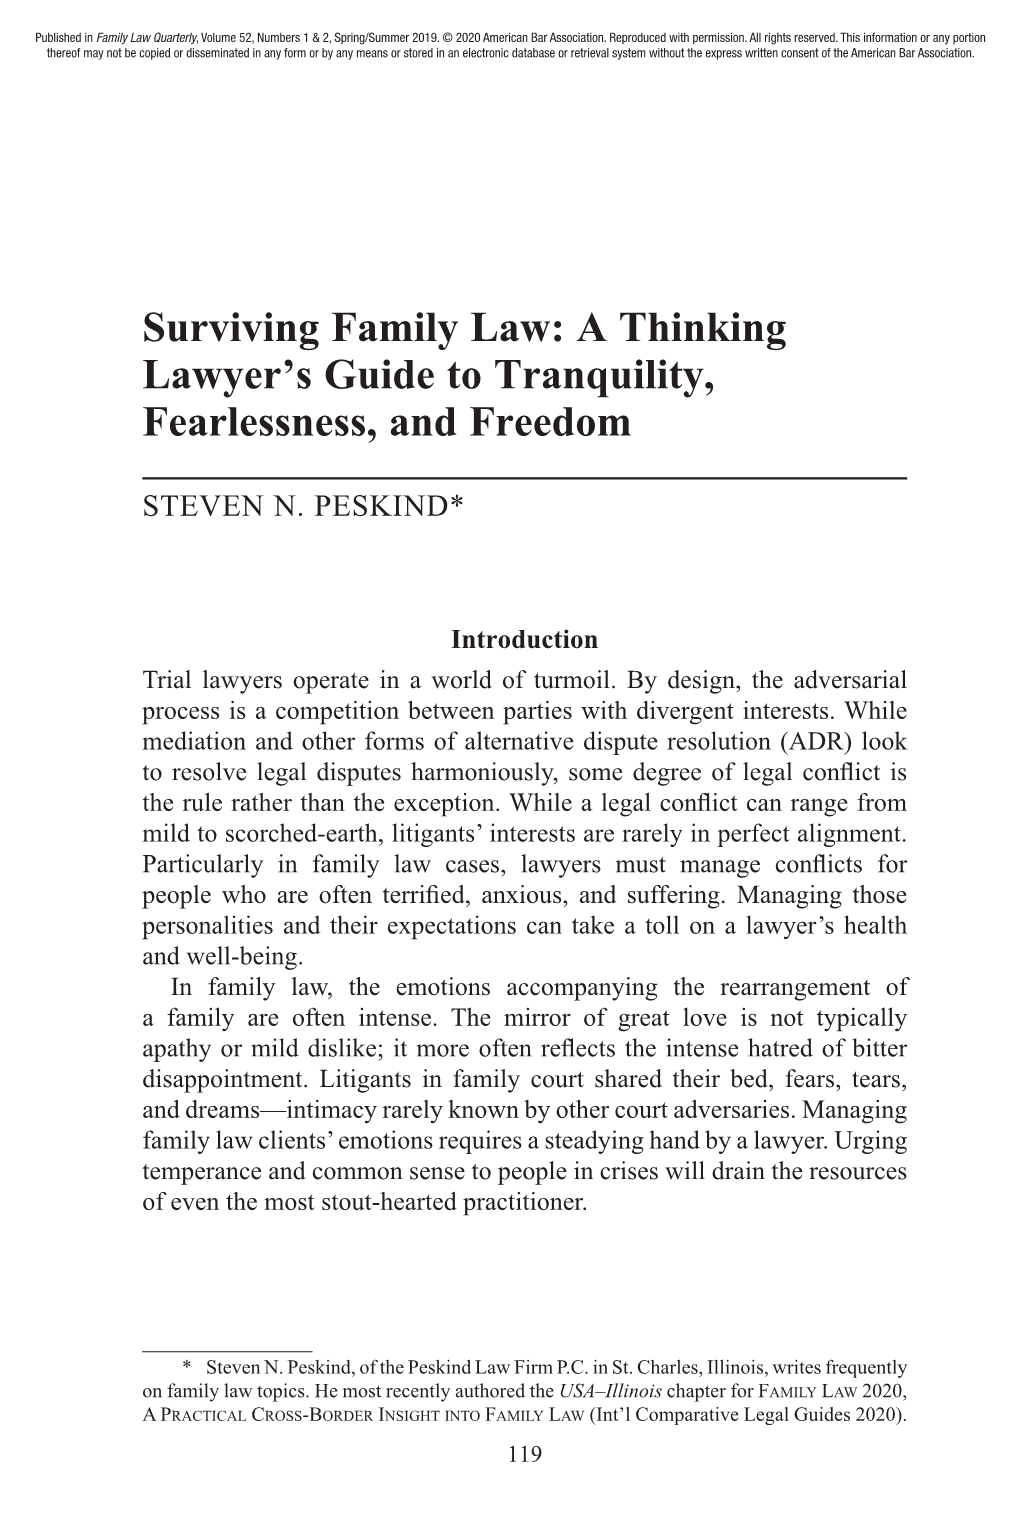 Surviving Family Law: a Thinking Lawyer’S Guide to Tranquility, Fearlessness, and Freedom